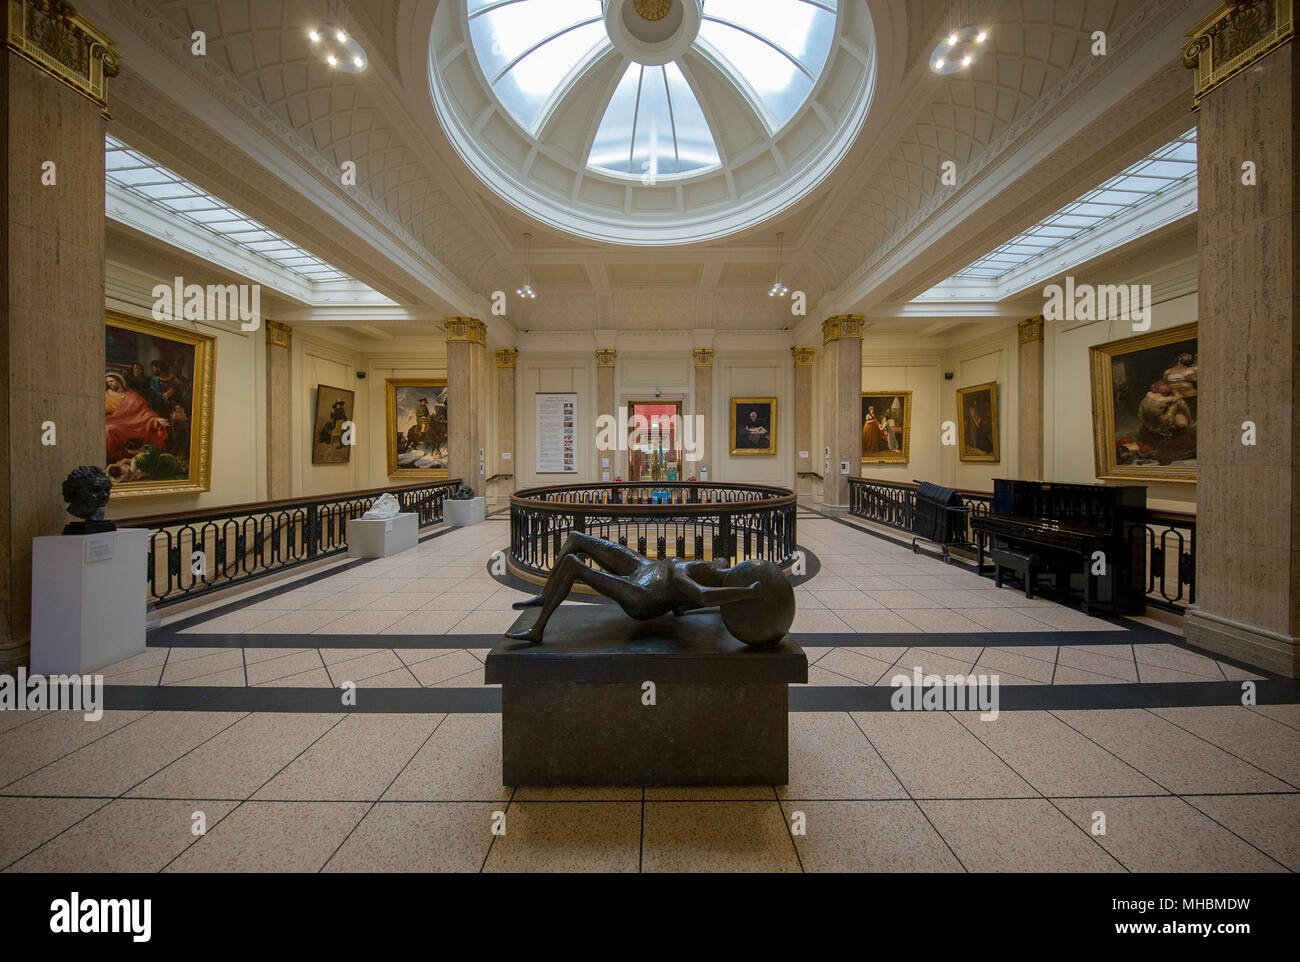 Inside the Walker Gallery in the heart of Liverpool, England Stock Photo